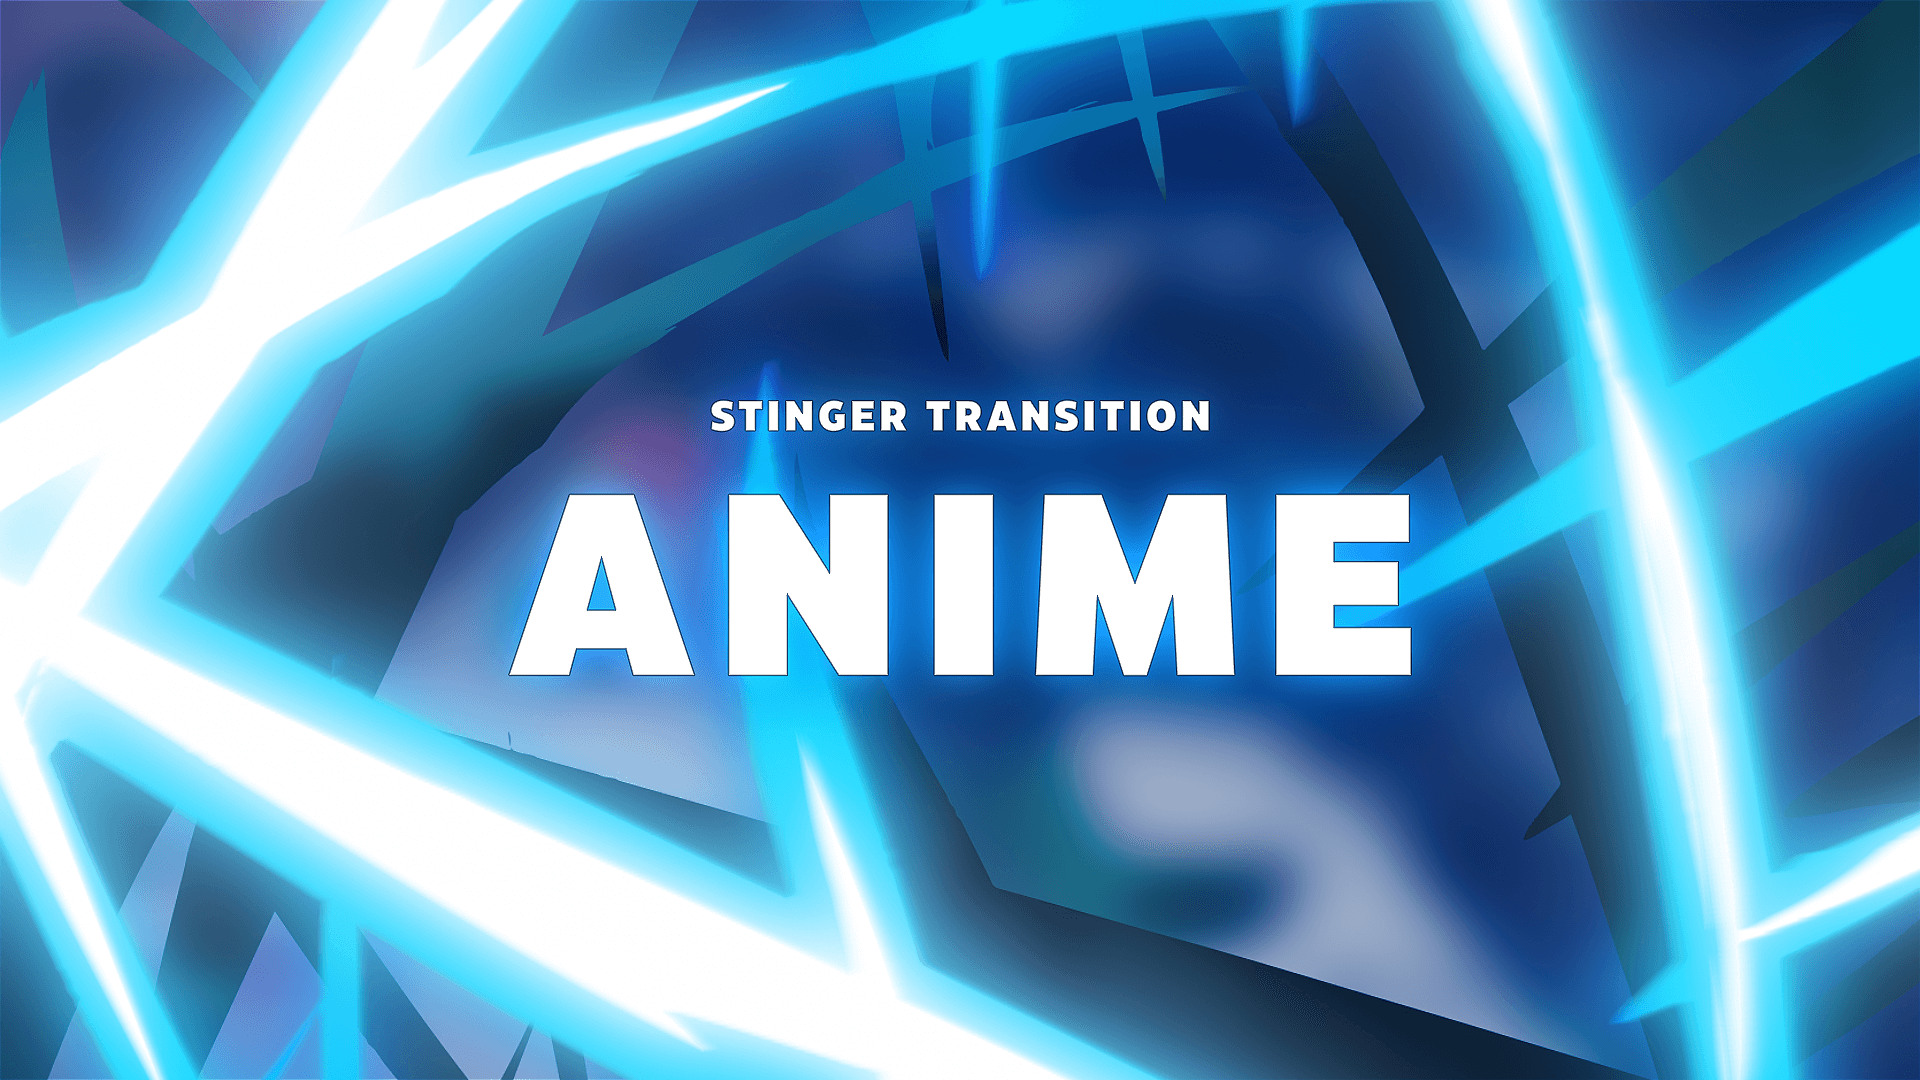 Anime - Stinger Transition for Twitch, Youtube and Facebook